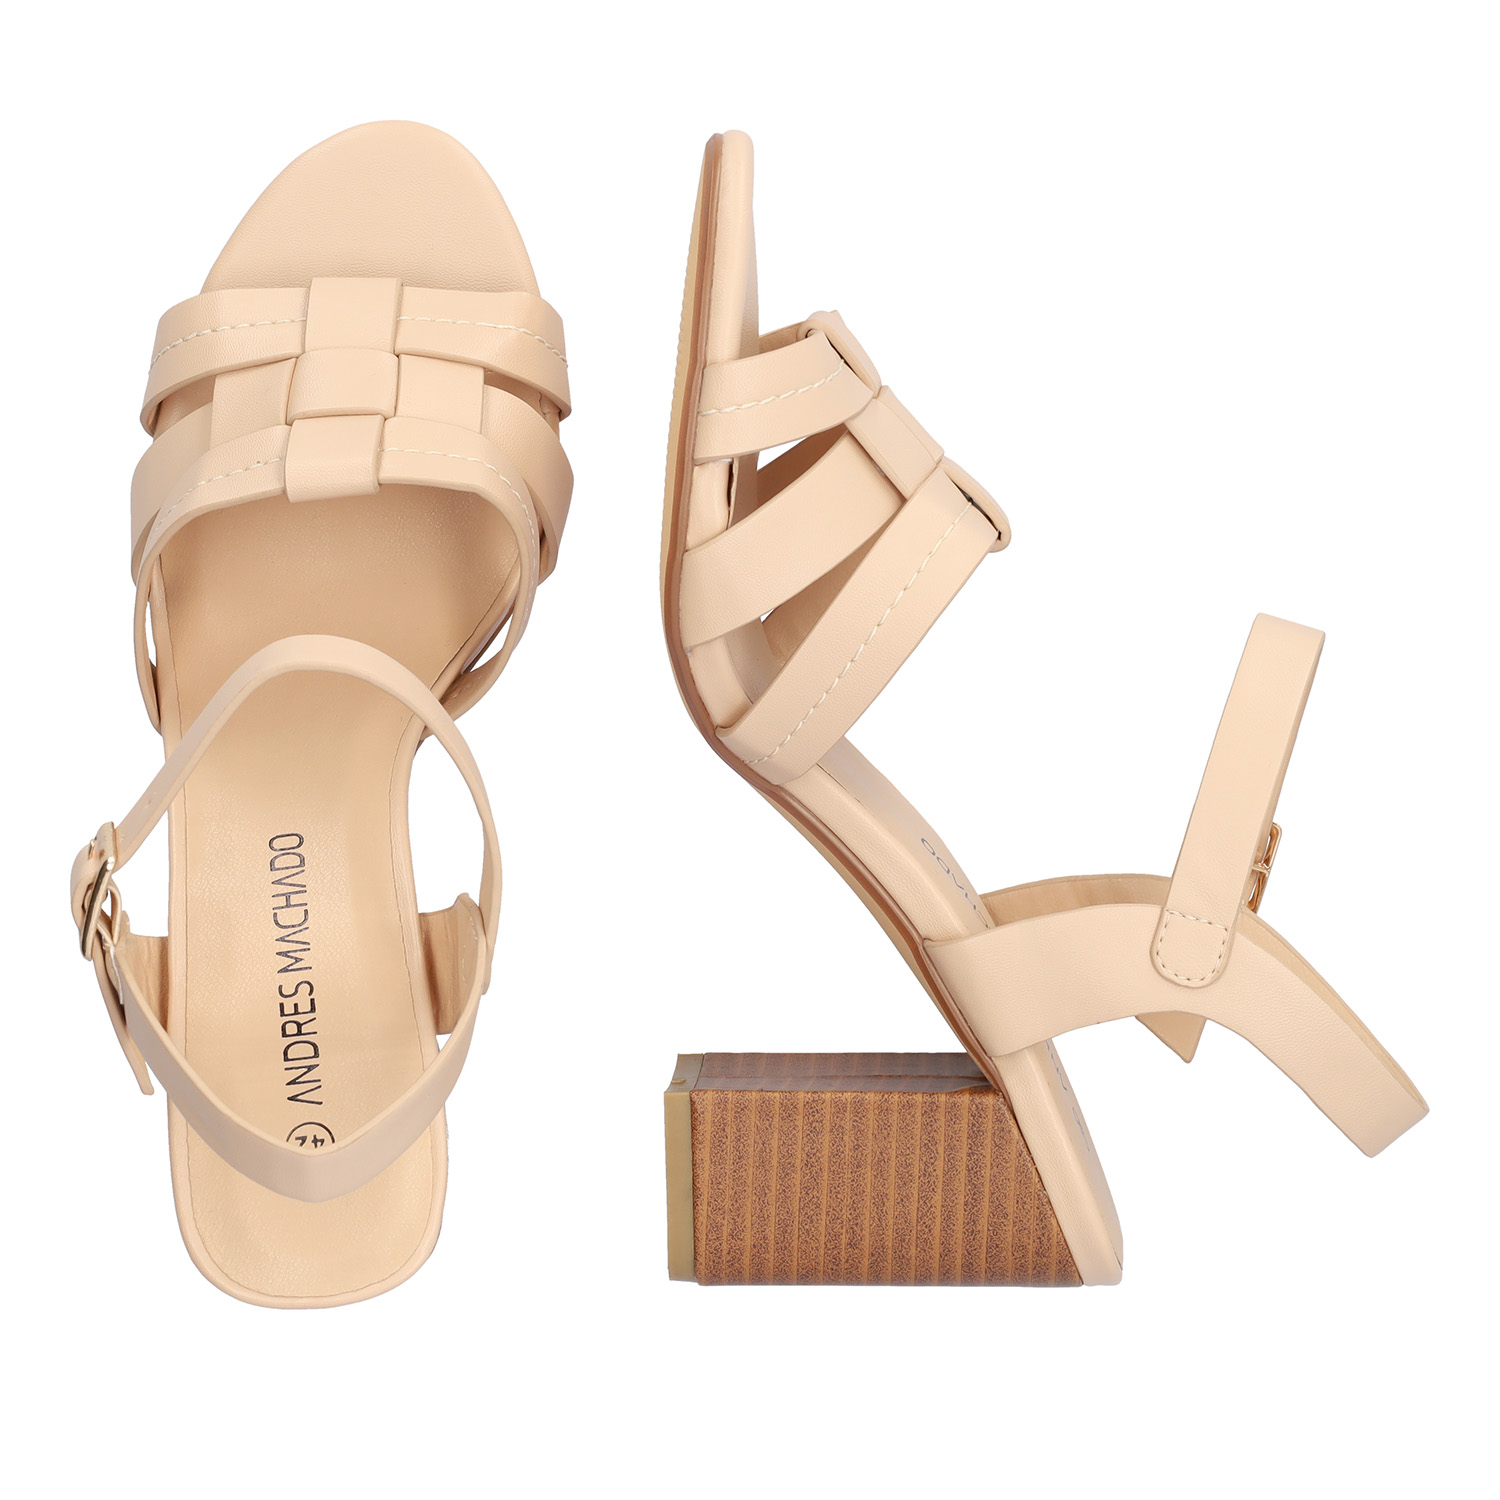 Soft nude colored sandals with squared heel 